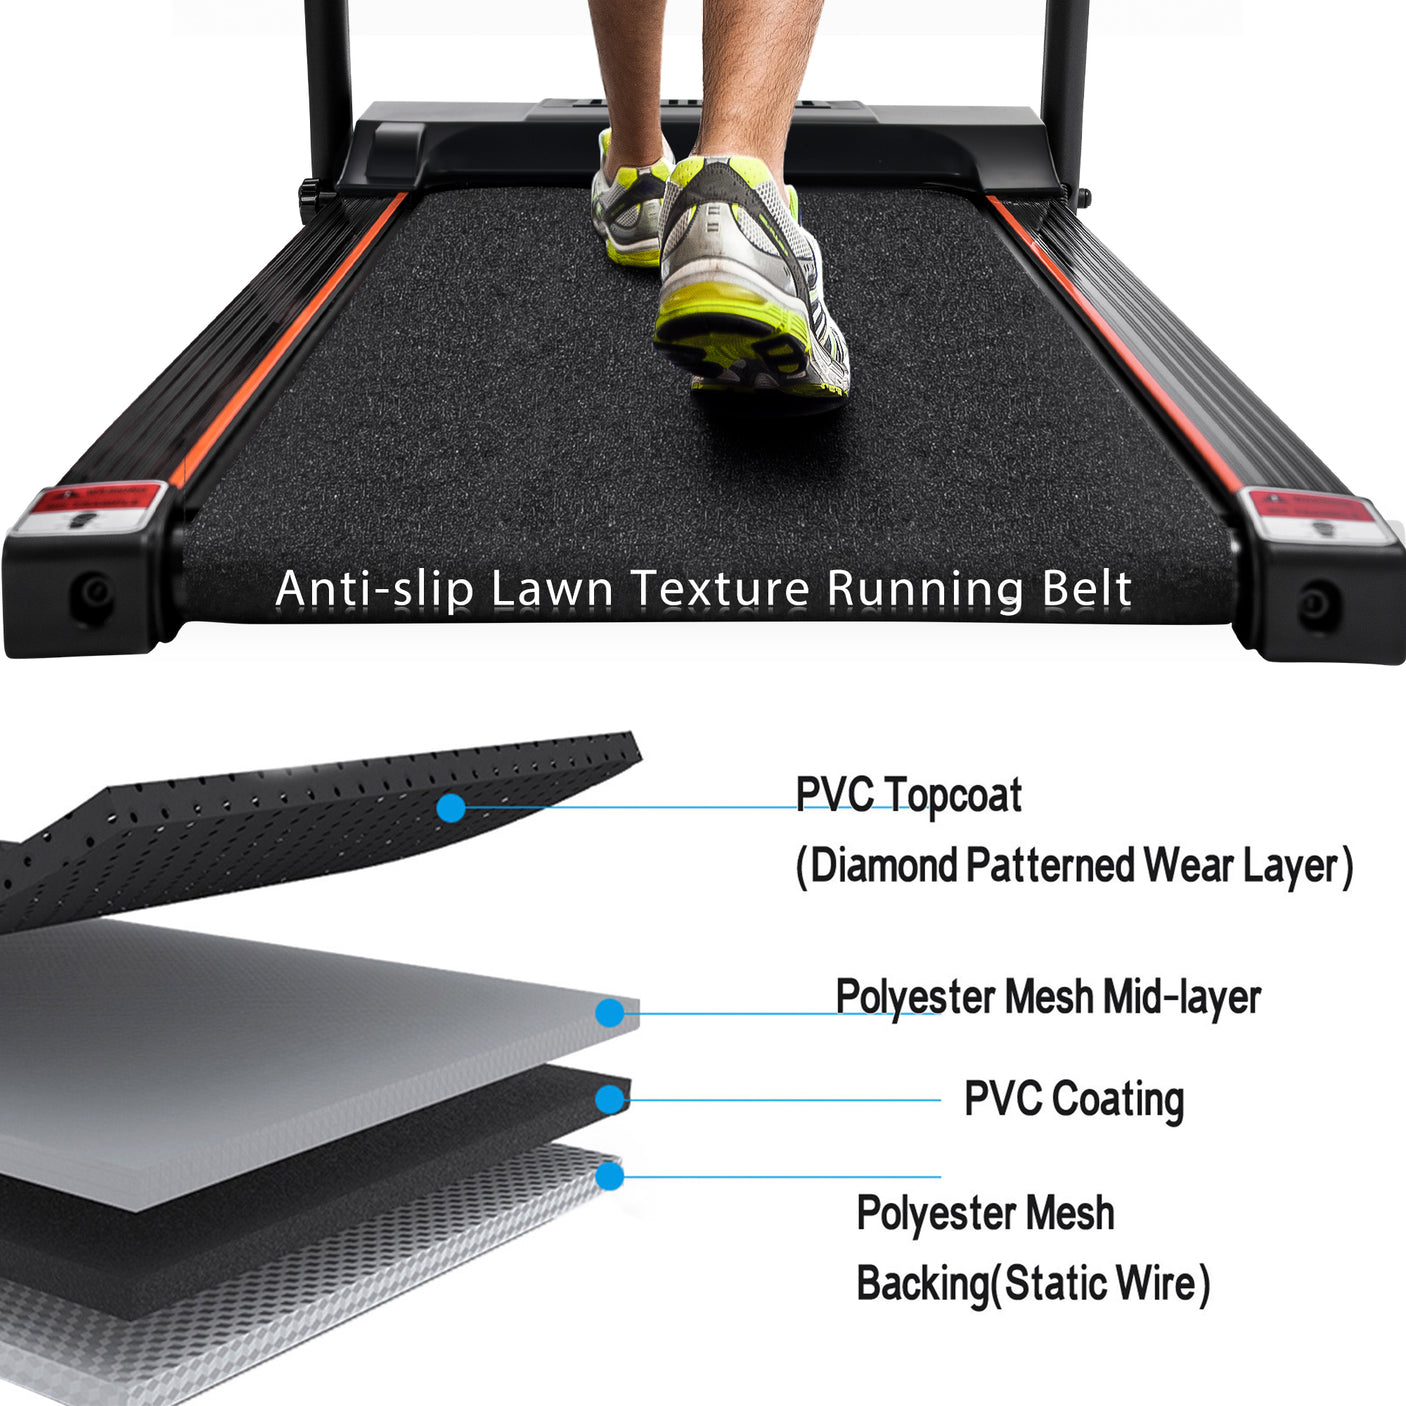 Folding Treadmill Electric Running Machine Walking Jogging Machine with 3 Level Incline 12 Preset Programs for Home Gym